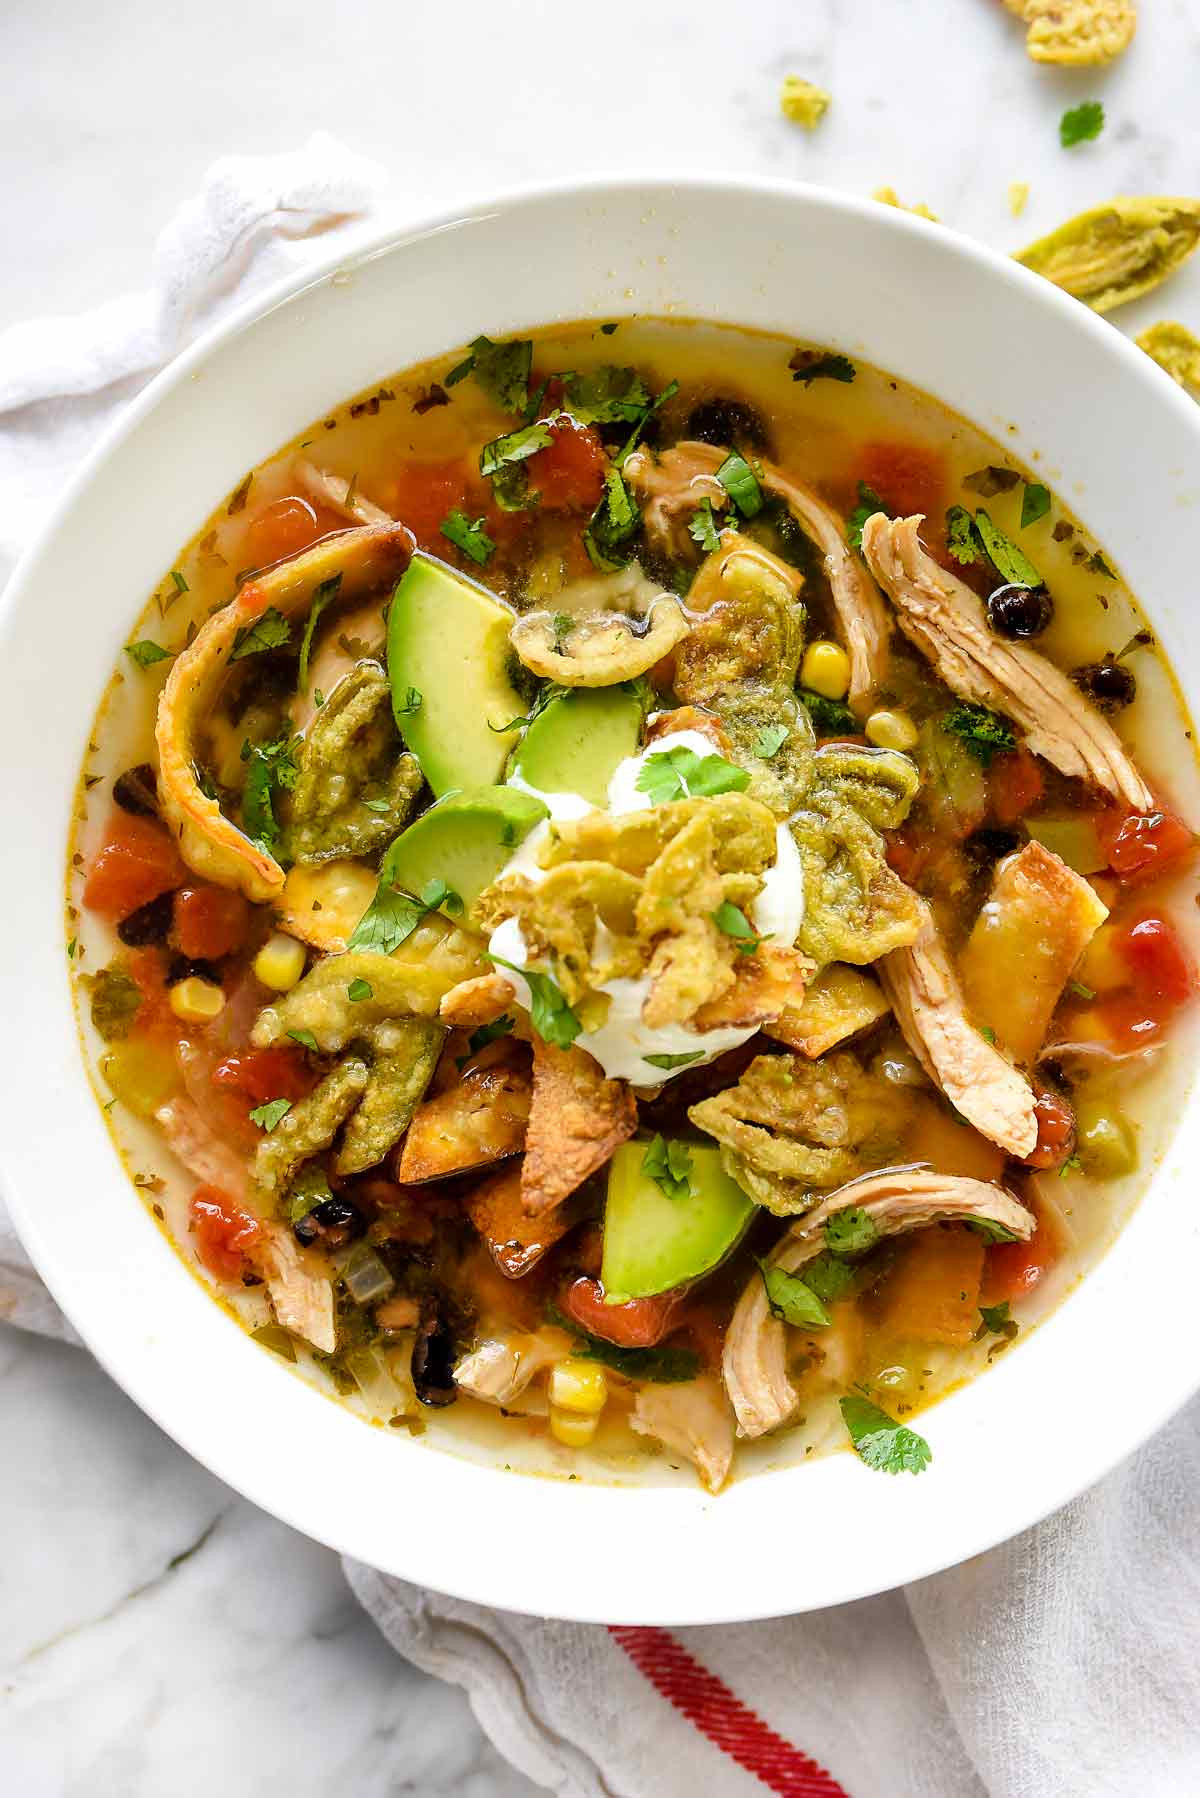 The 20 Best Ideas for Chili's Chicken tortilla soup - Best Recipes